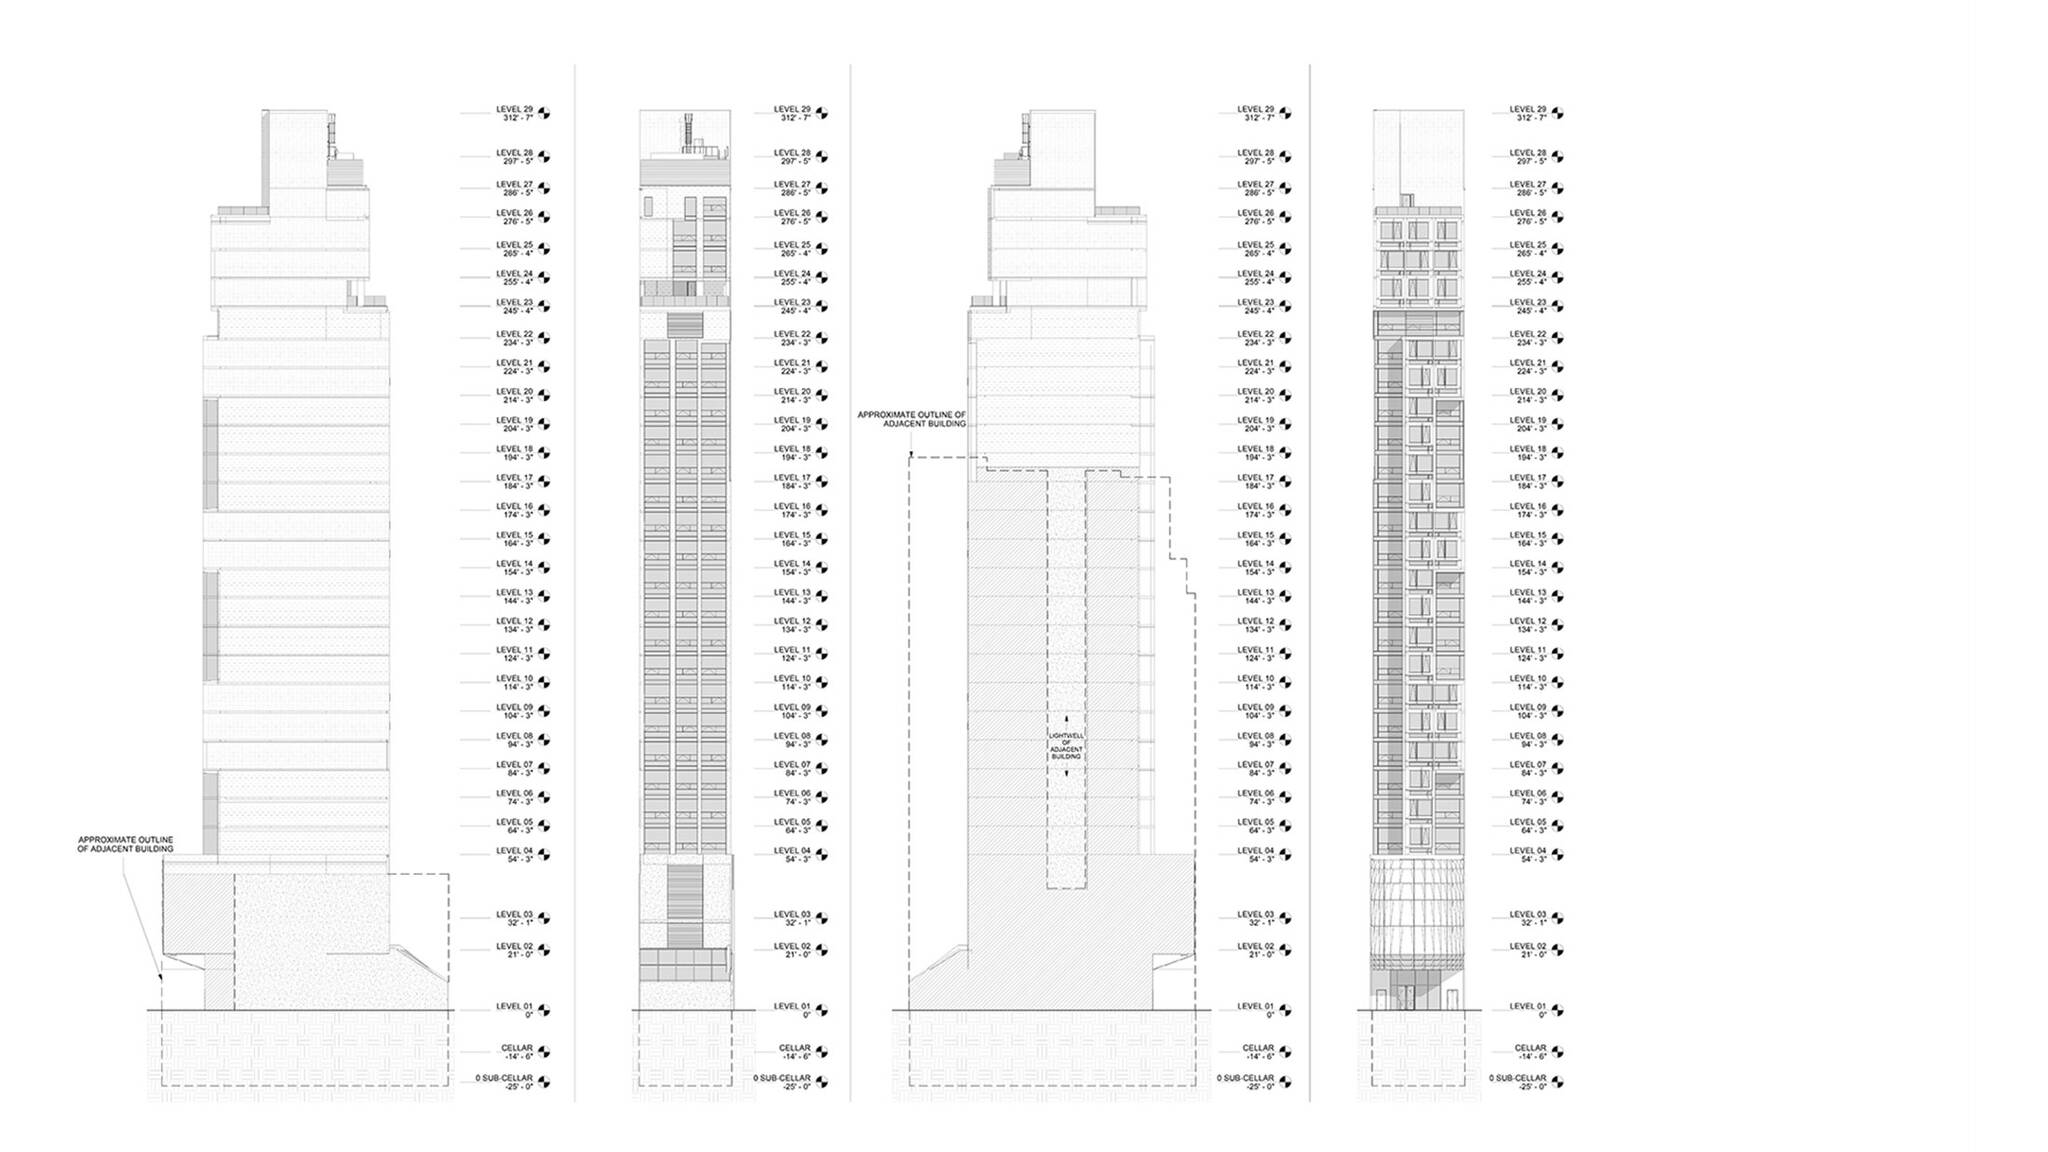 Elevations views of the Brooklyn Motto Hotel project, a modular hotel tower on Schermerhorn Street in Brooklyn, New York designed by the architecture studio Danny Forster & Architecture